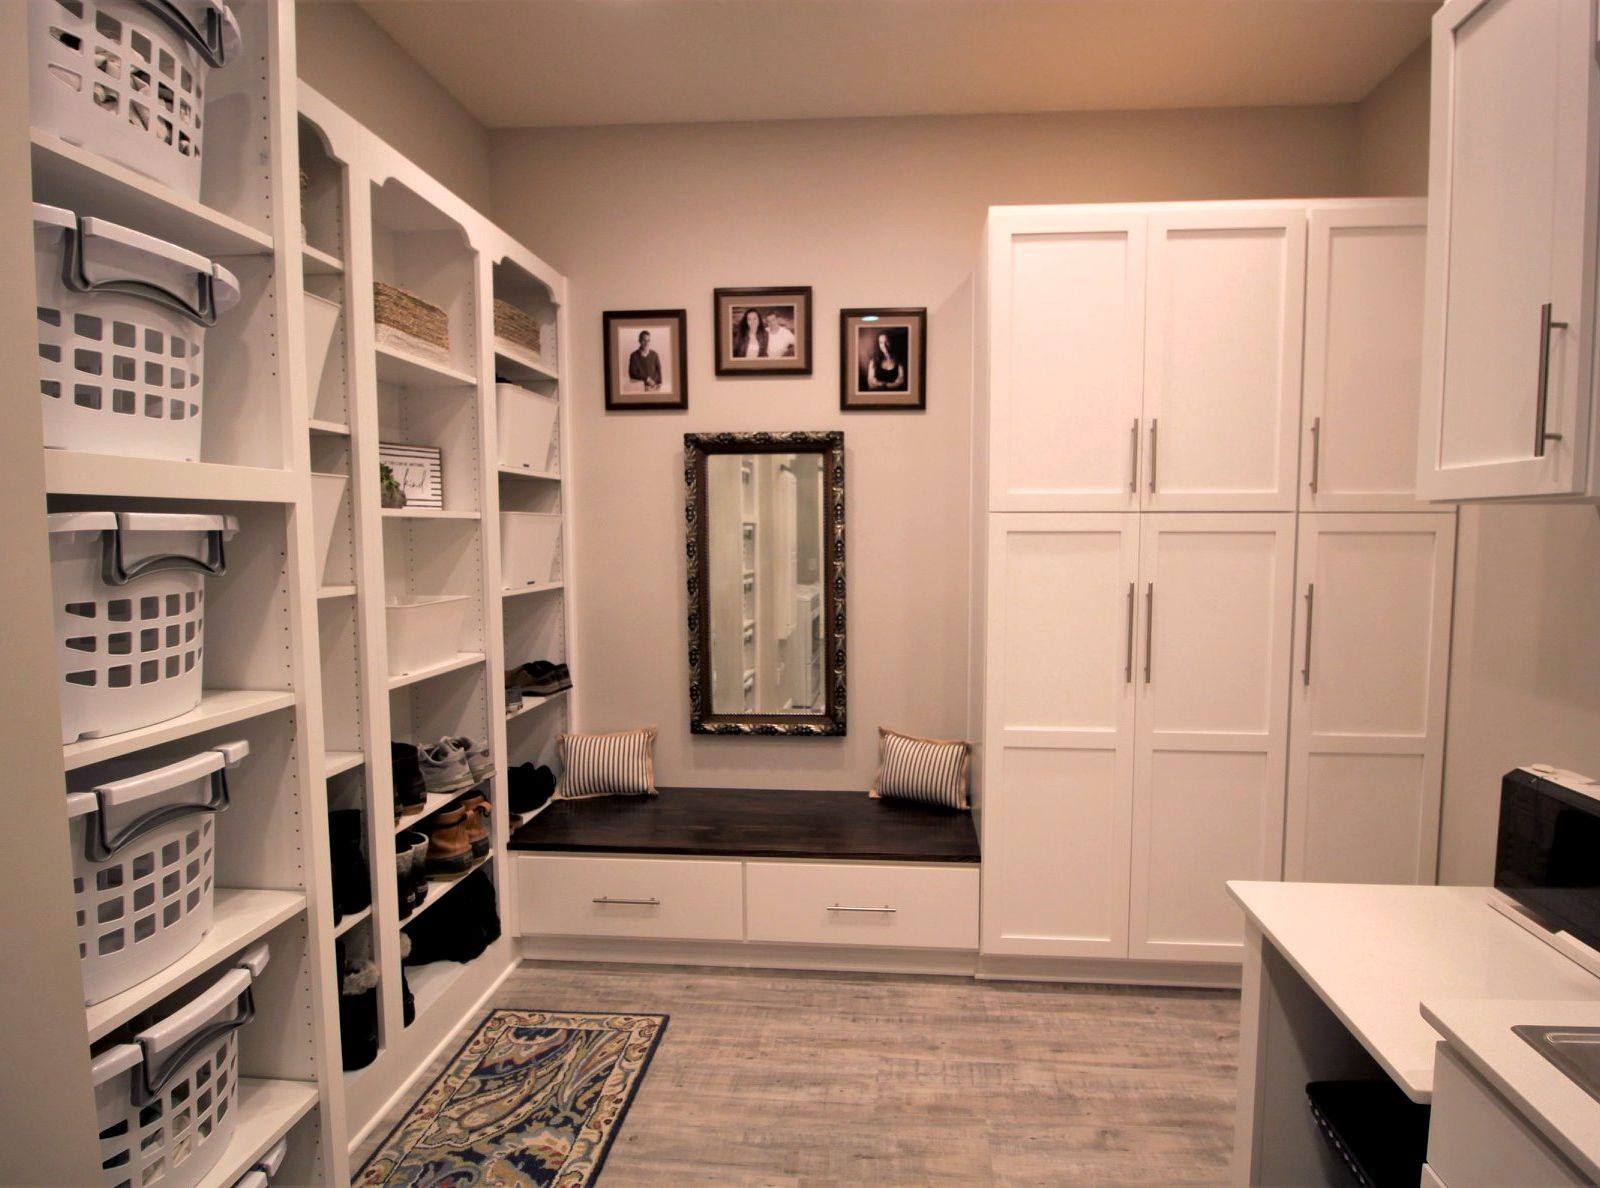 Custom hall or entry cabinets can help ensure a clutter-free organized home